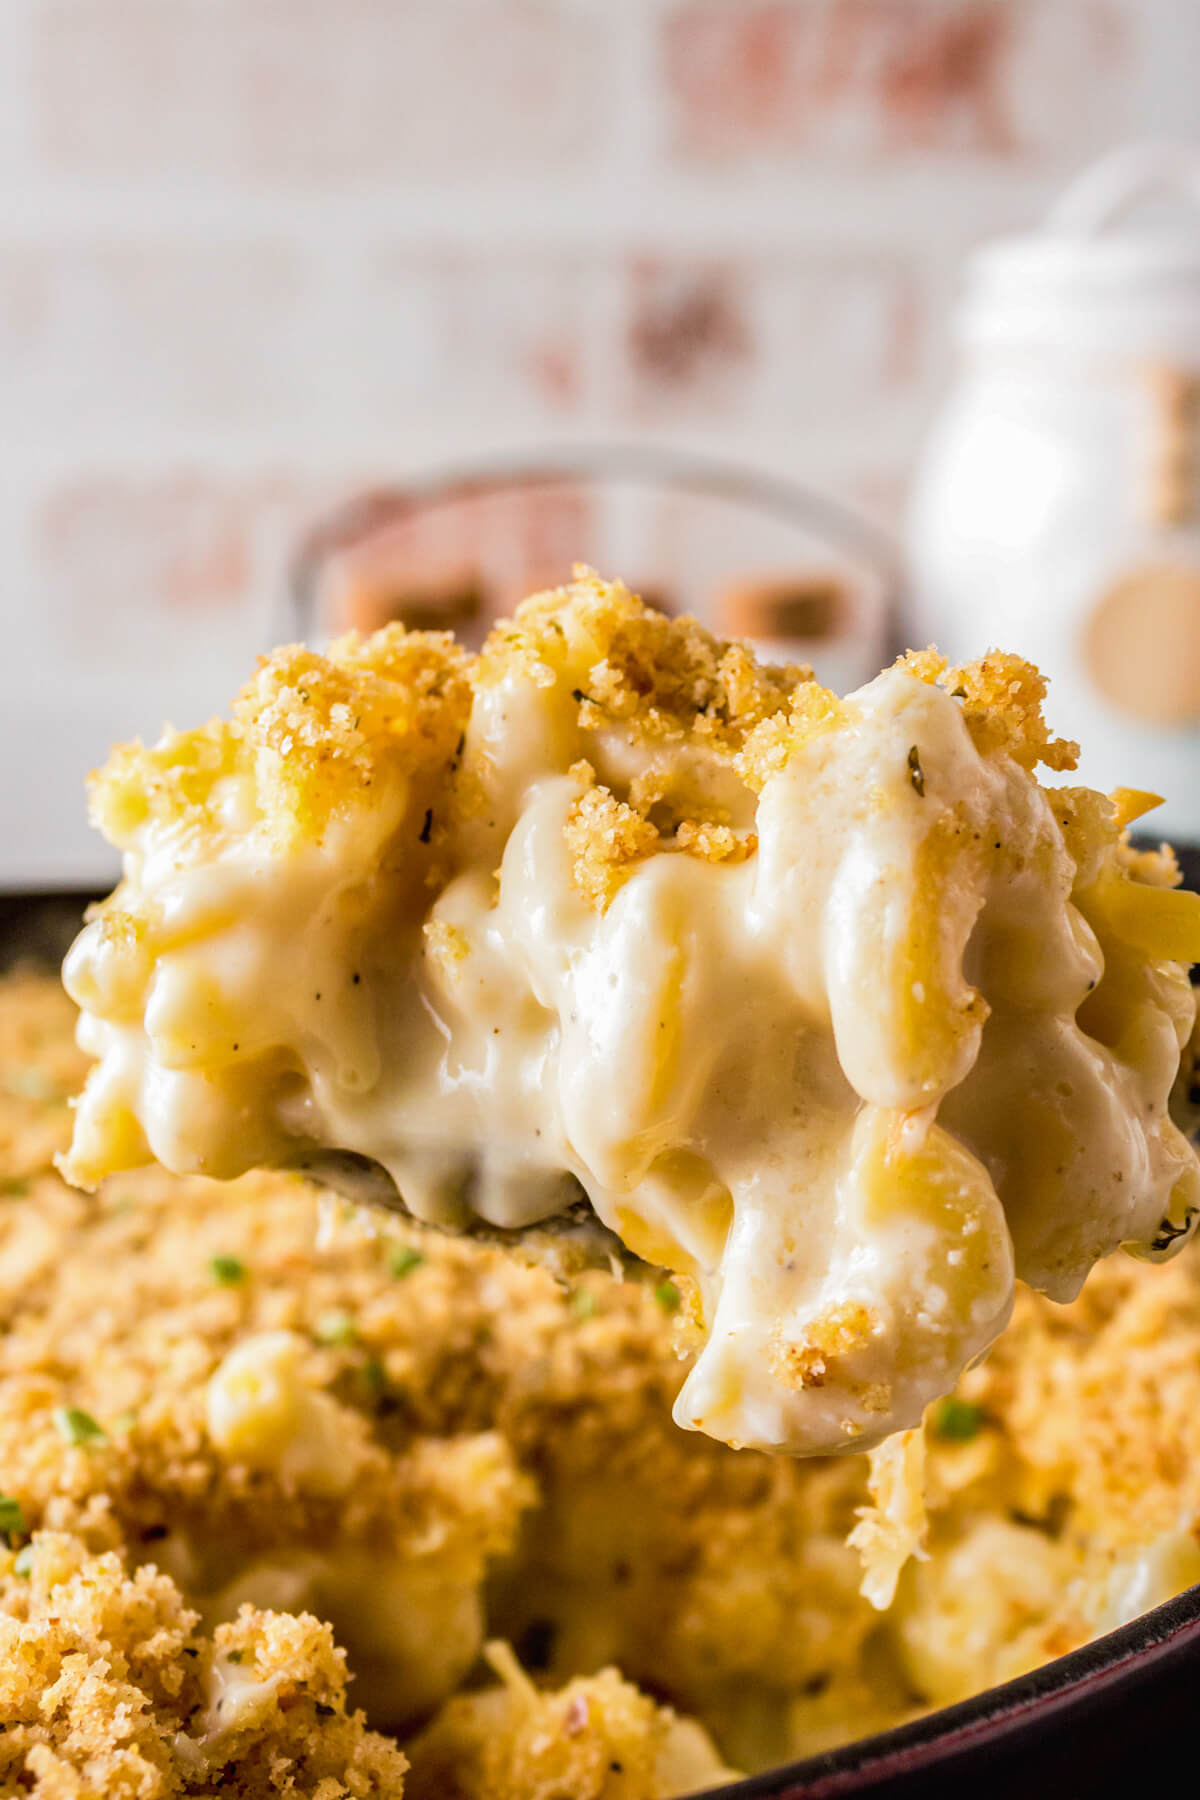 A scoopful of creamy Smoked Mac and Cheese topped with toasted golden bread crumbs.